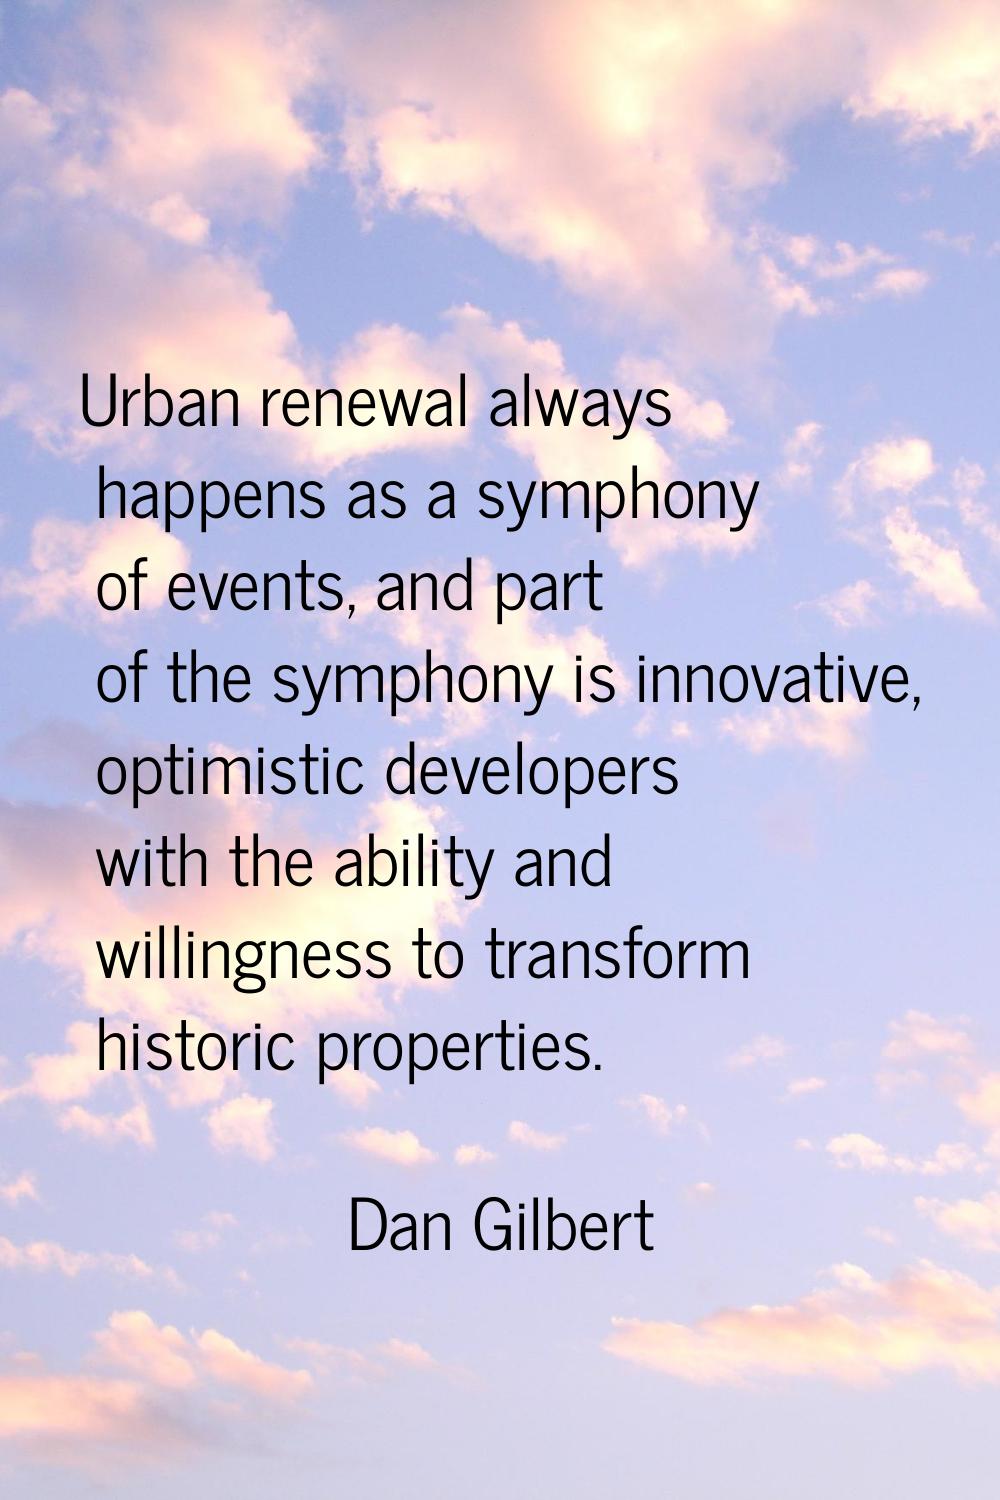 Urban renewal always happens as a symphony of events, and part of the symphony is innovative, optim